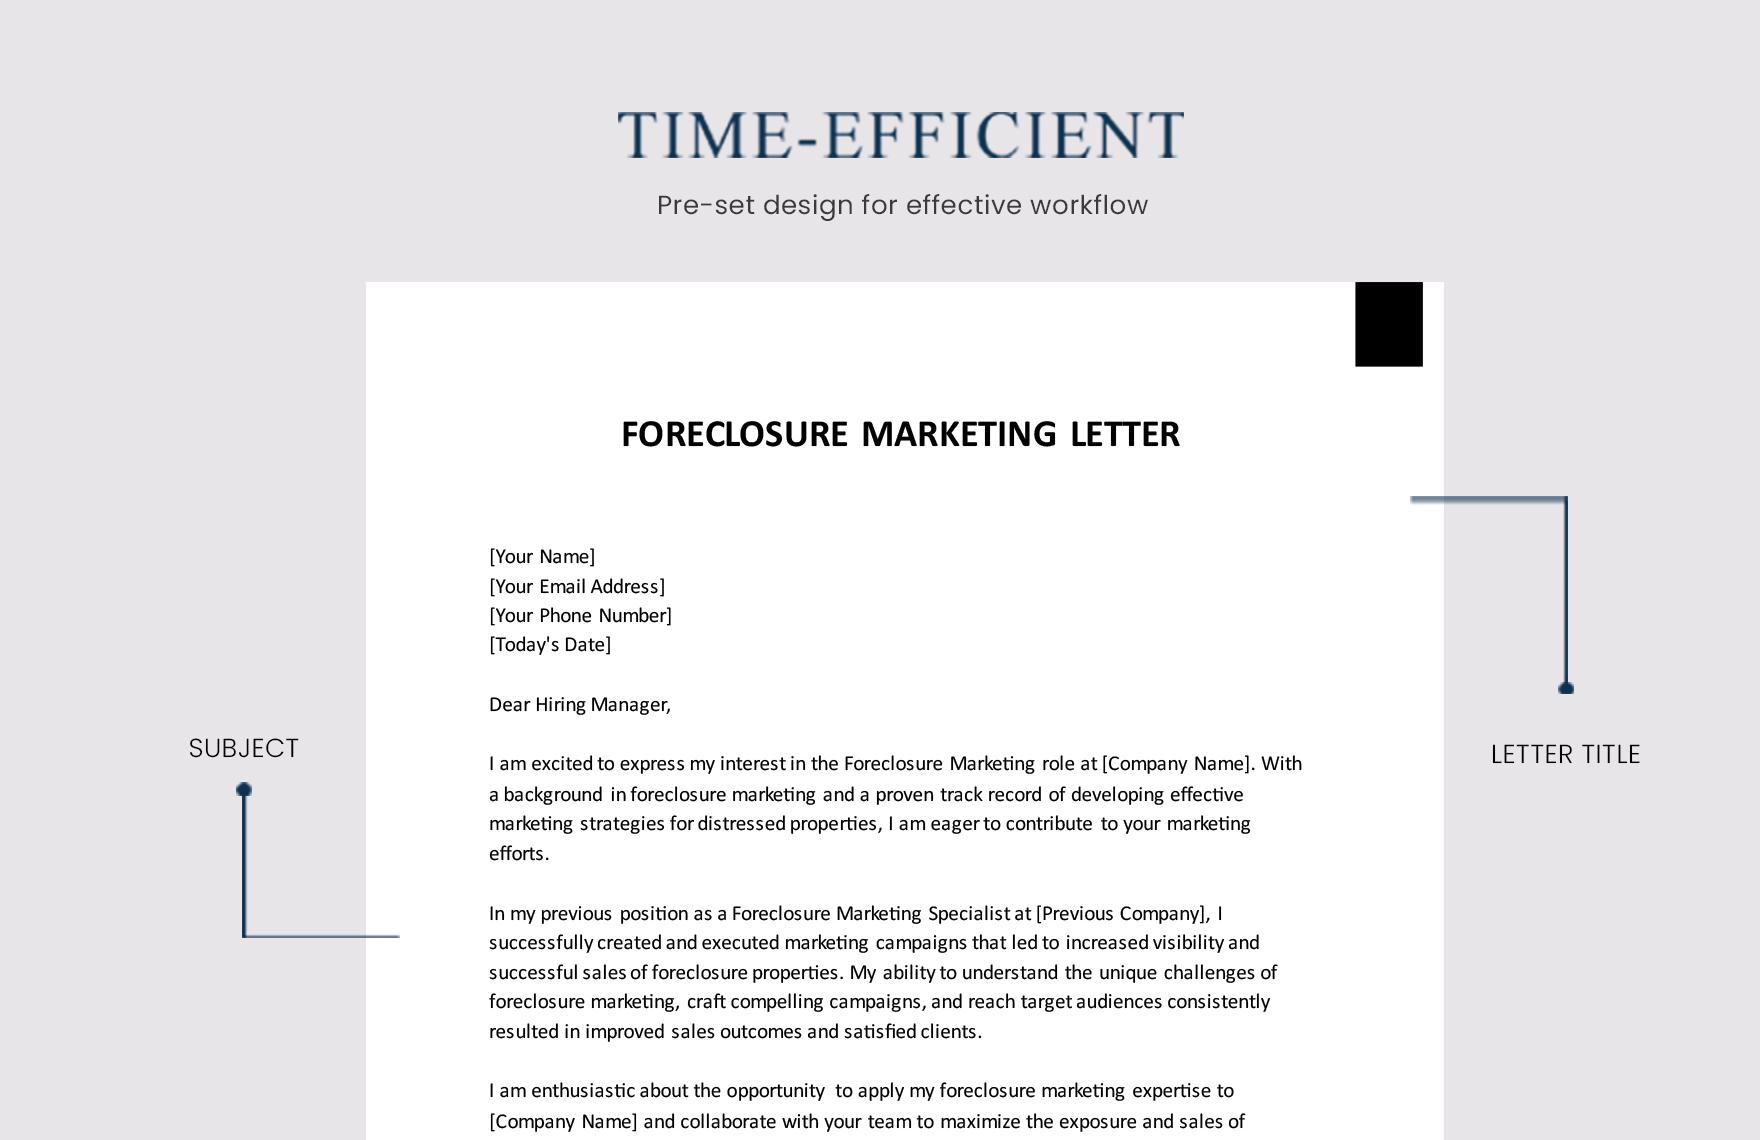 Foreclosure Marketing Letter